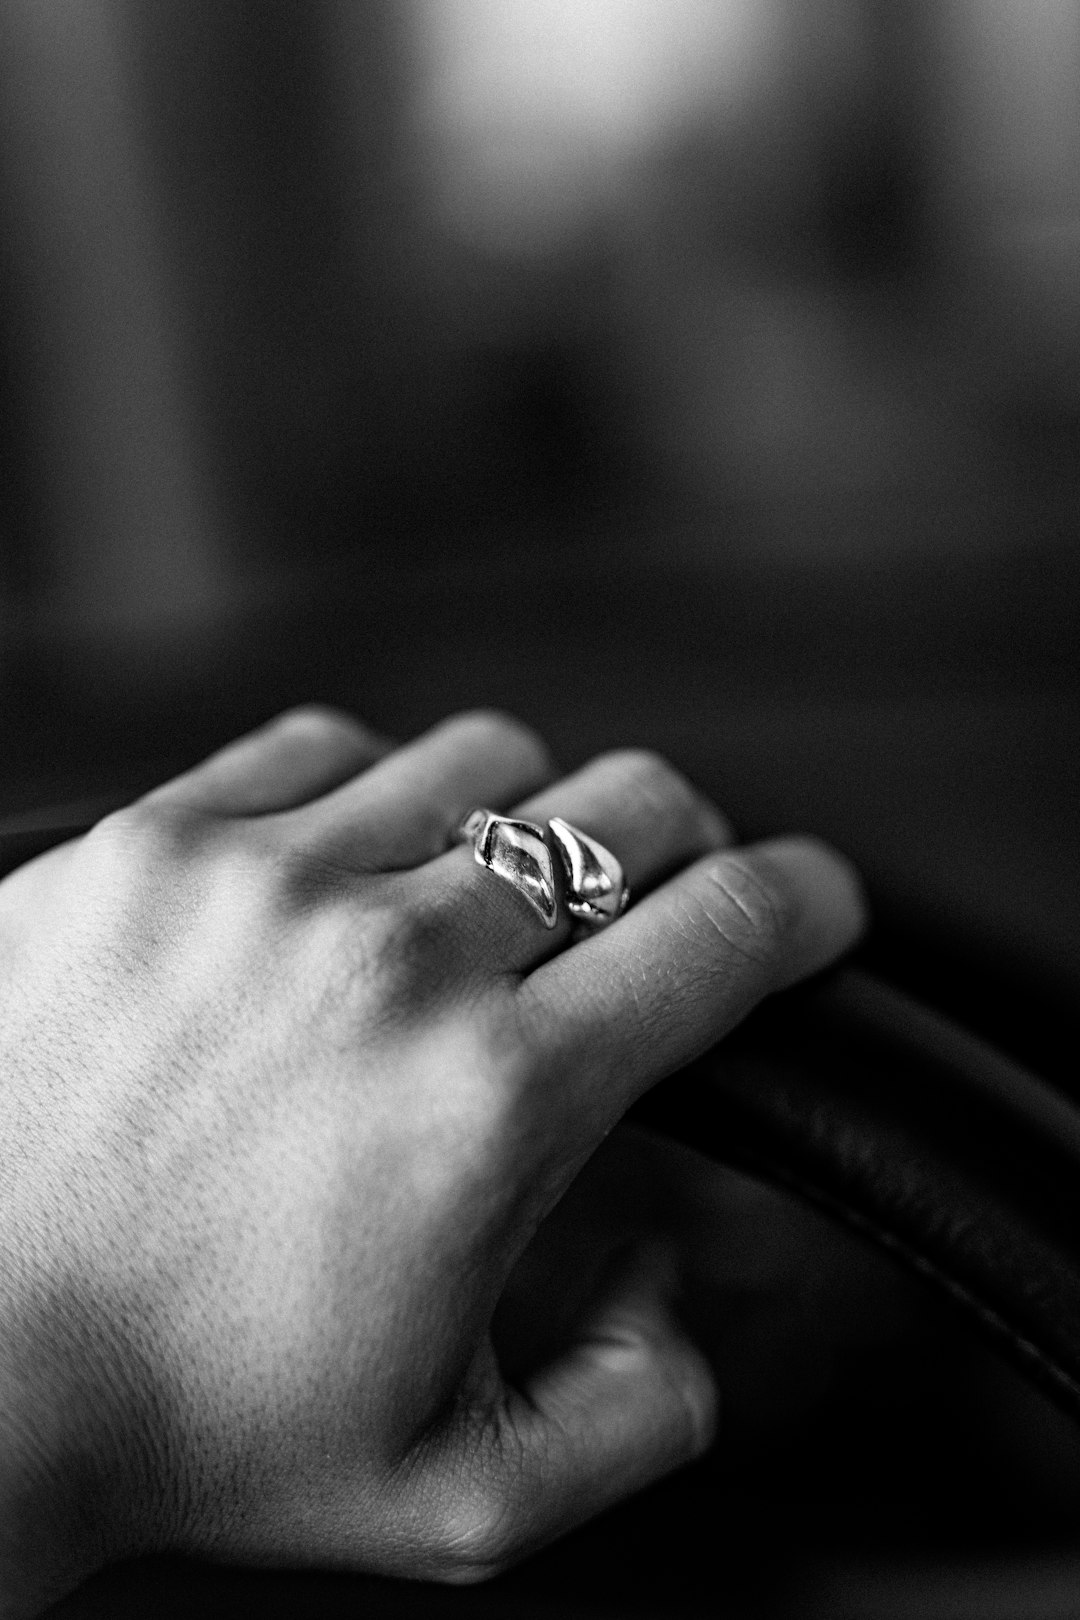 grayscale photo of person wearing silver ring